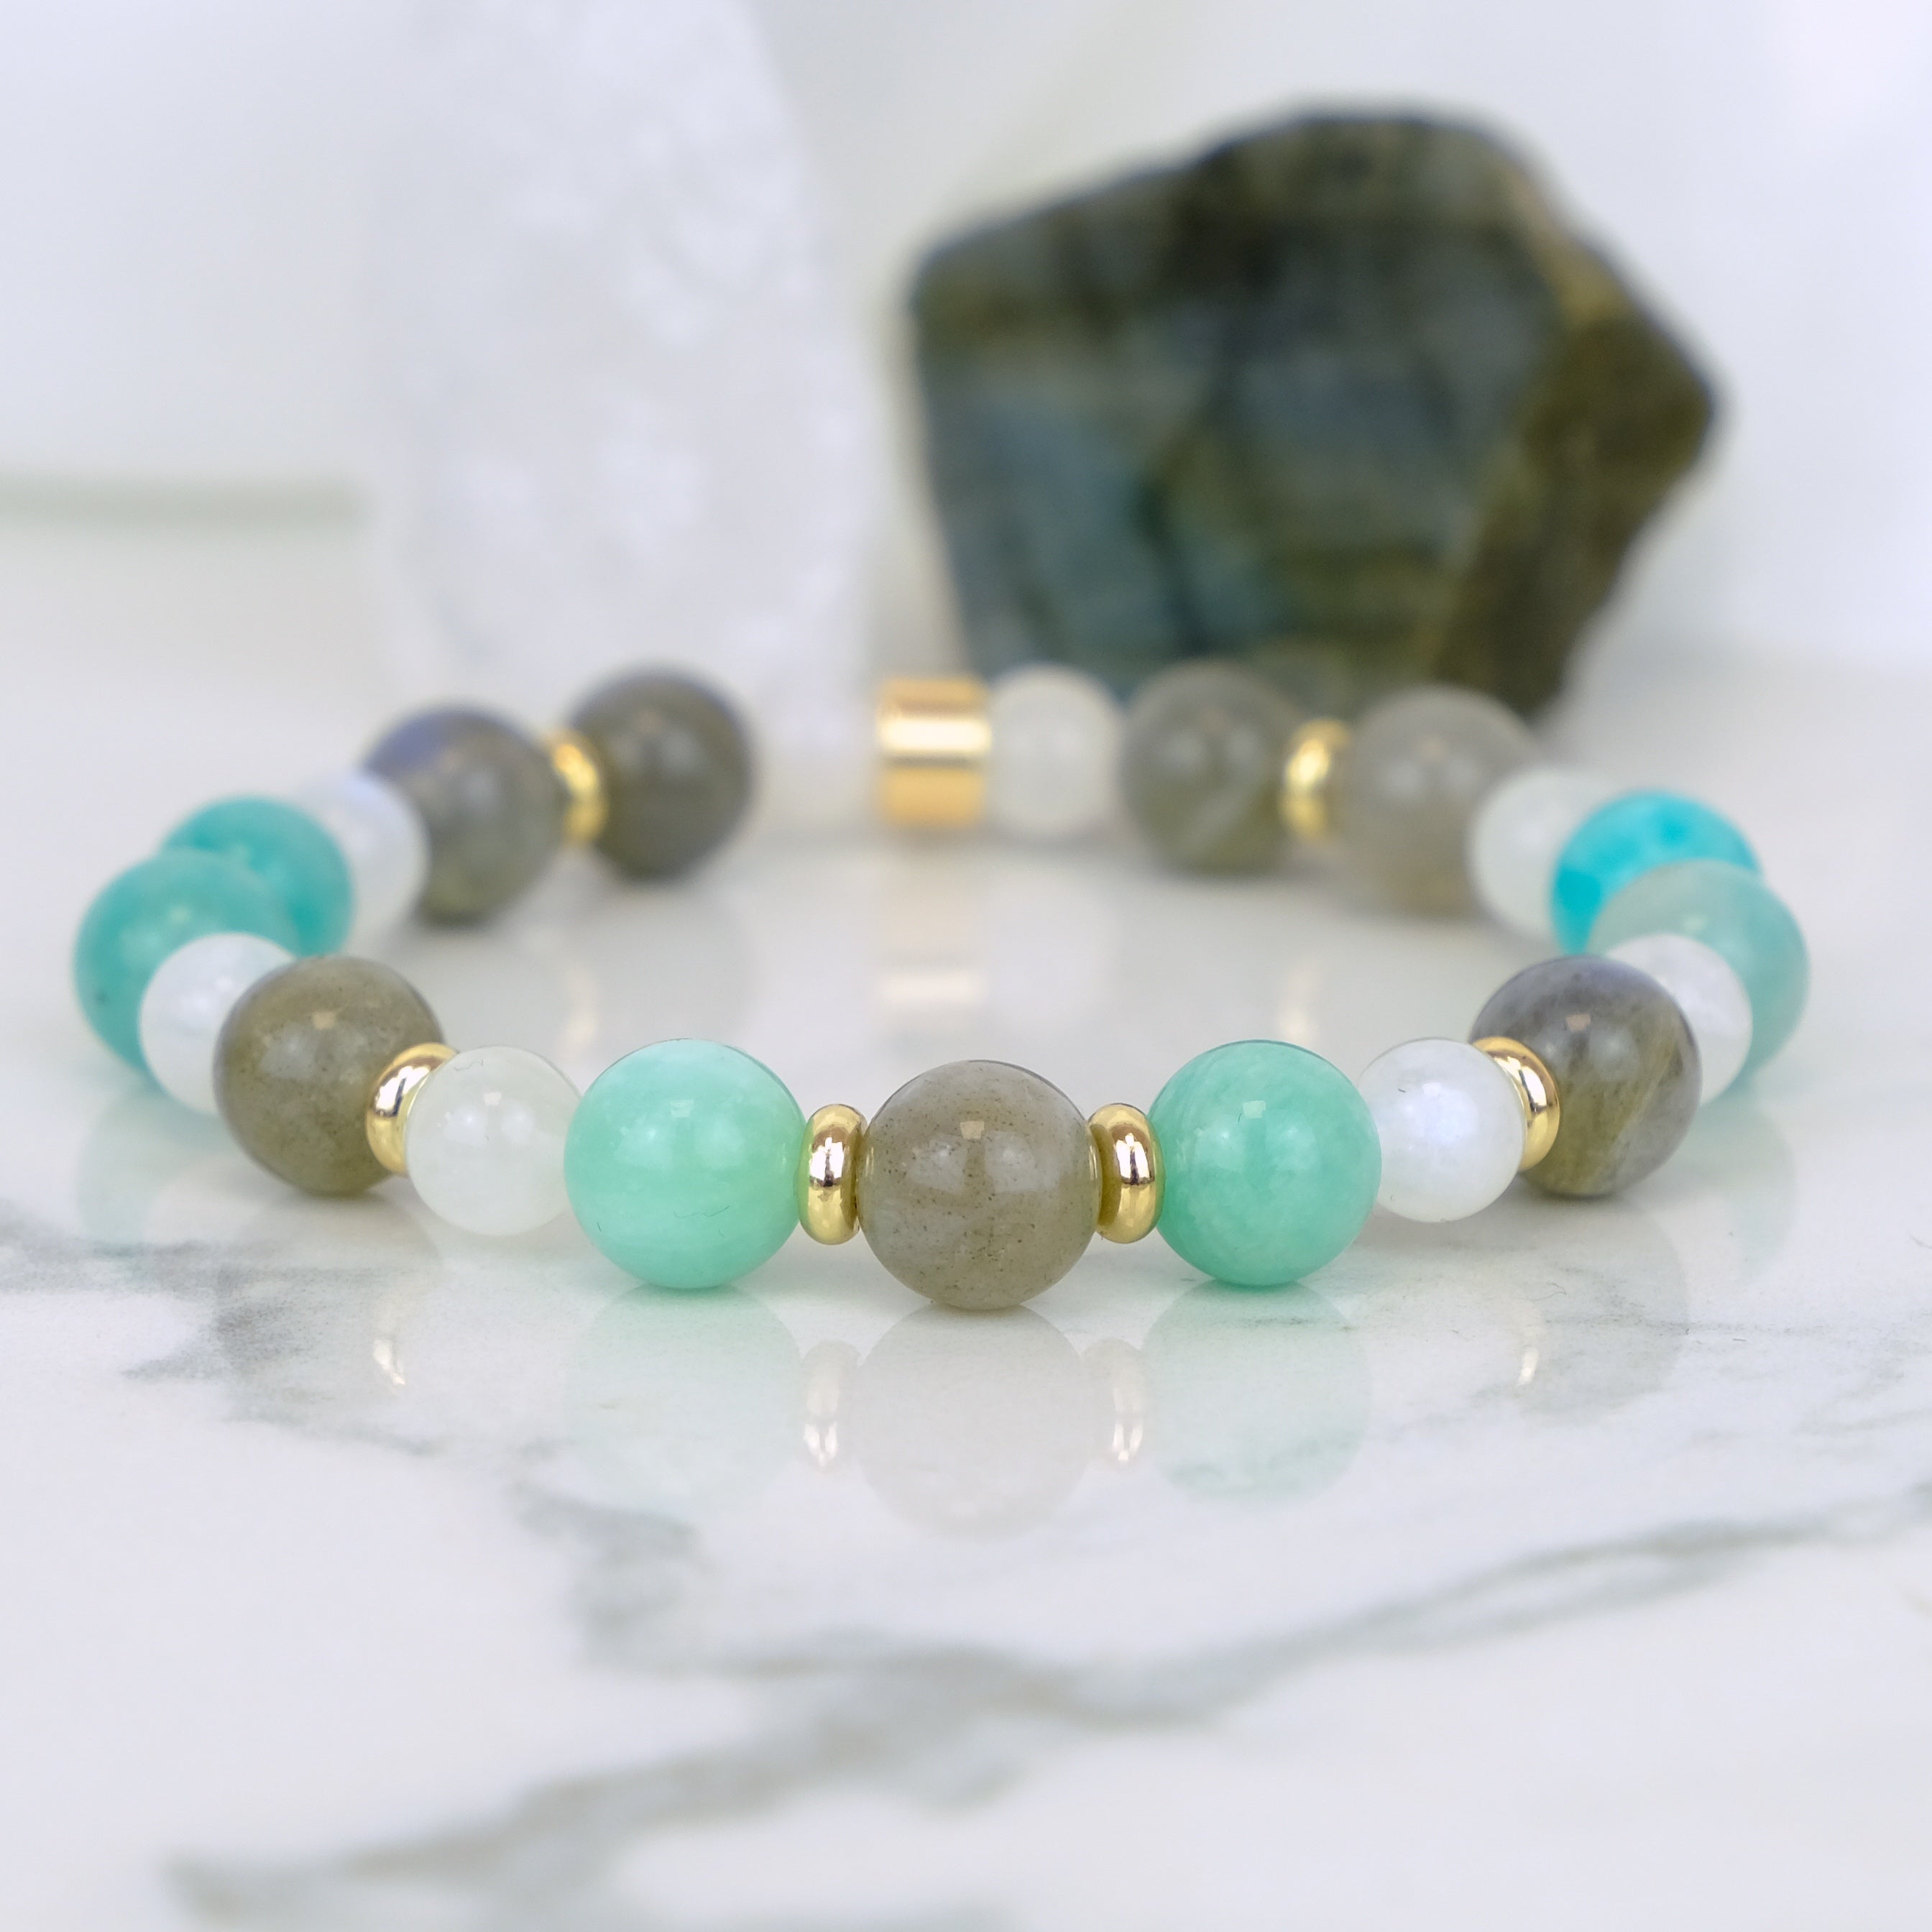 Moonstone, Labradorite and Amazonite bracelet with gold accents